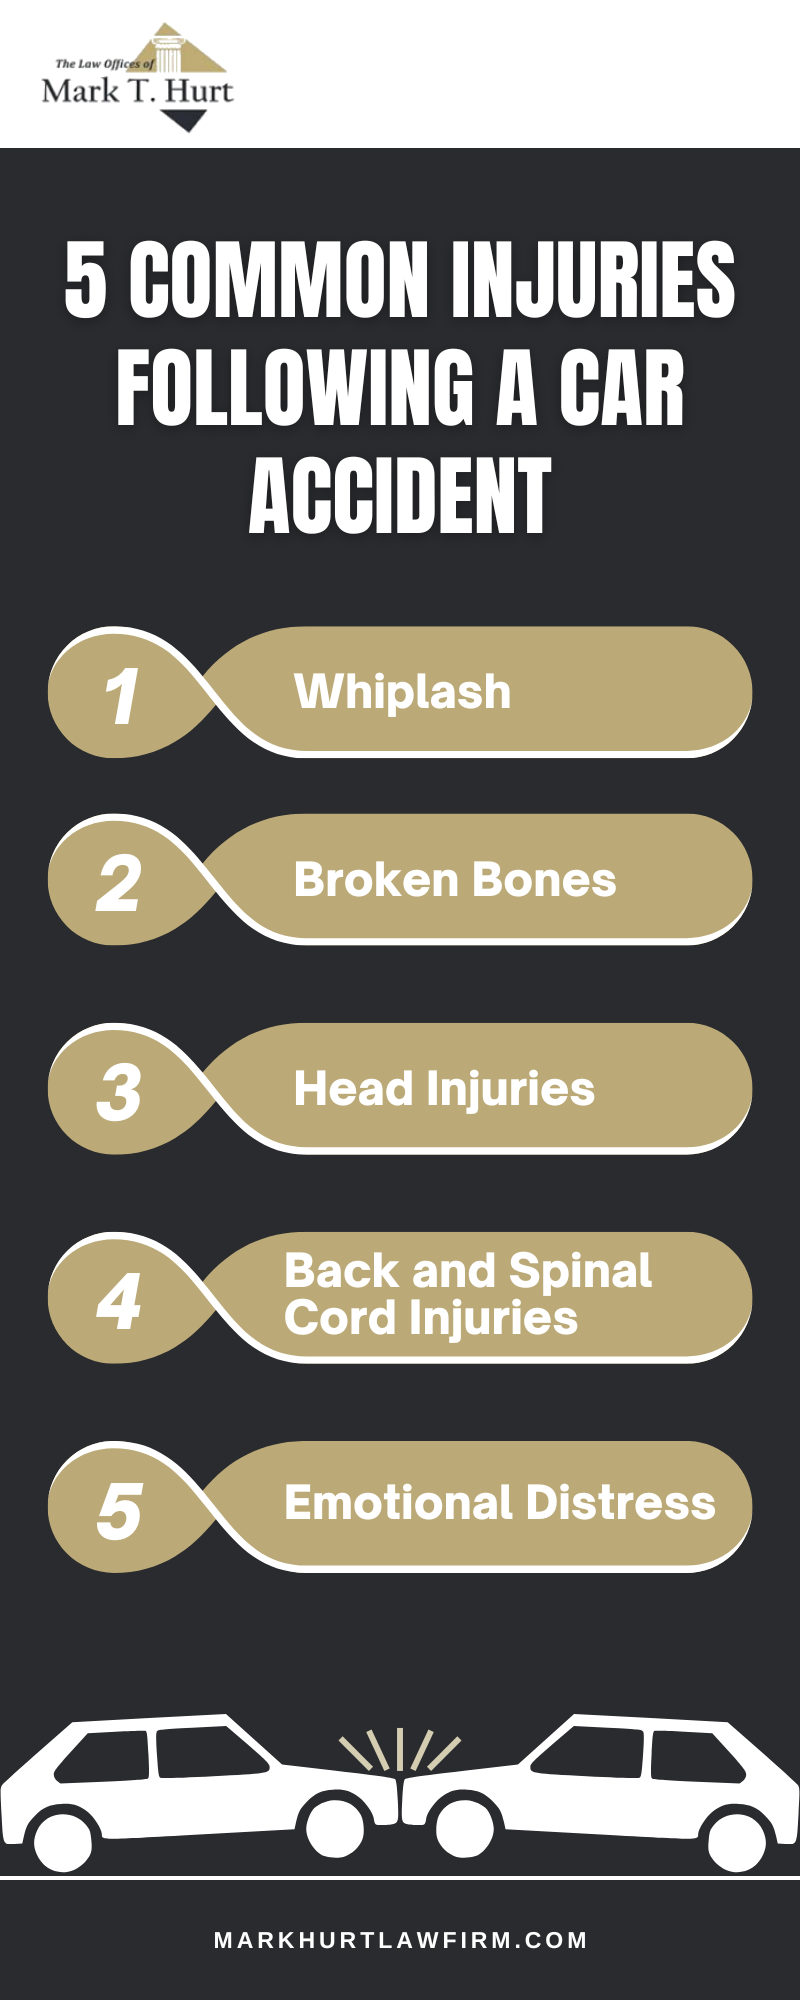 5 Common Injuries Following A Car Accident Infographic